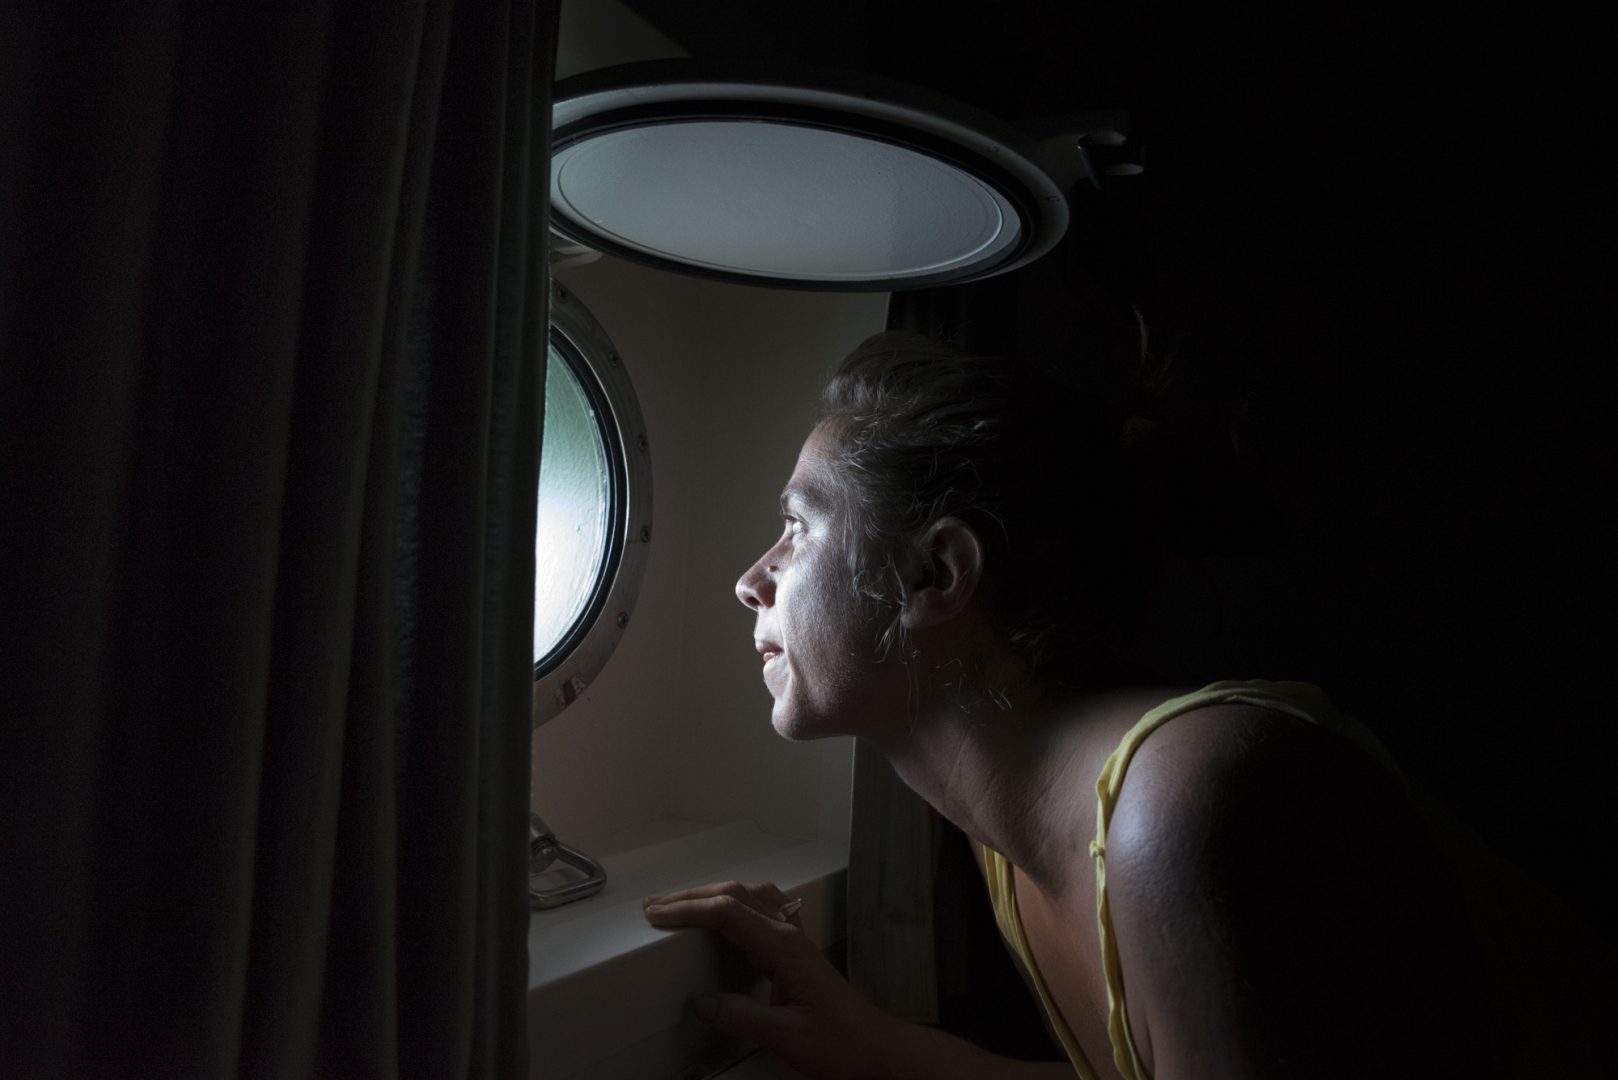 Rainbow Warrior III cook Laurence Nicoud wakes and checks the weather from her cabin.